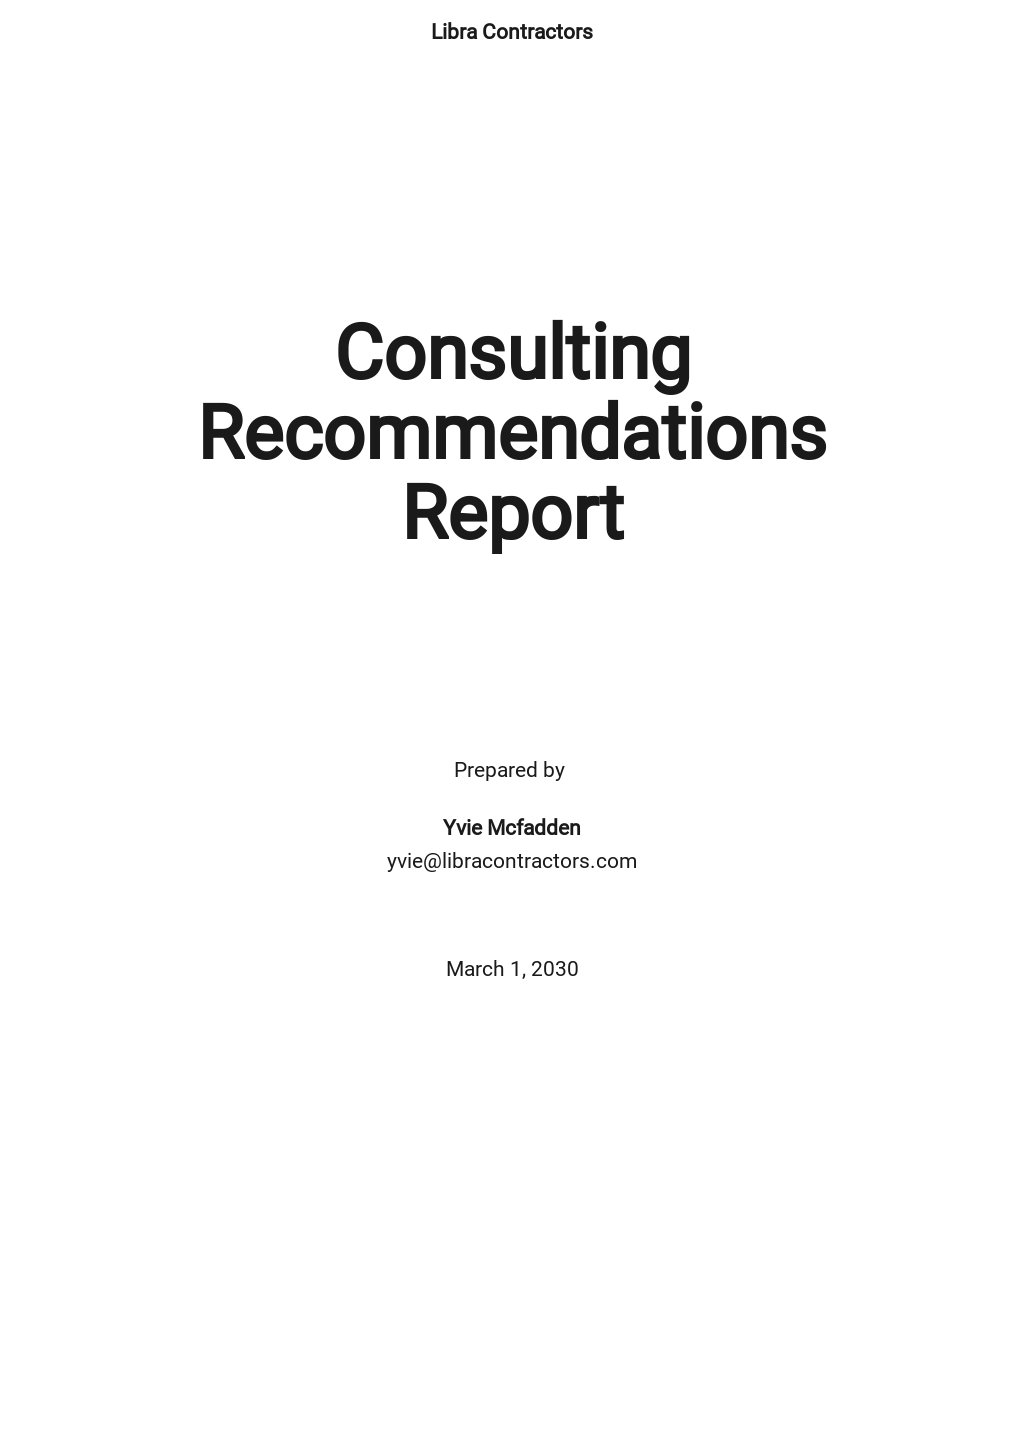 Consulting Recommendations Report Template.jpe